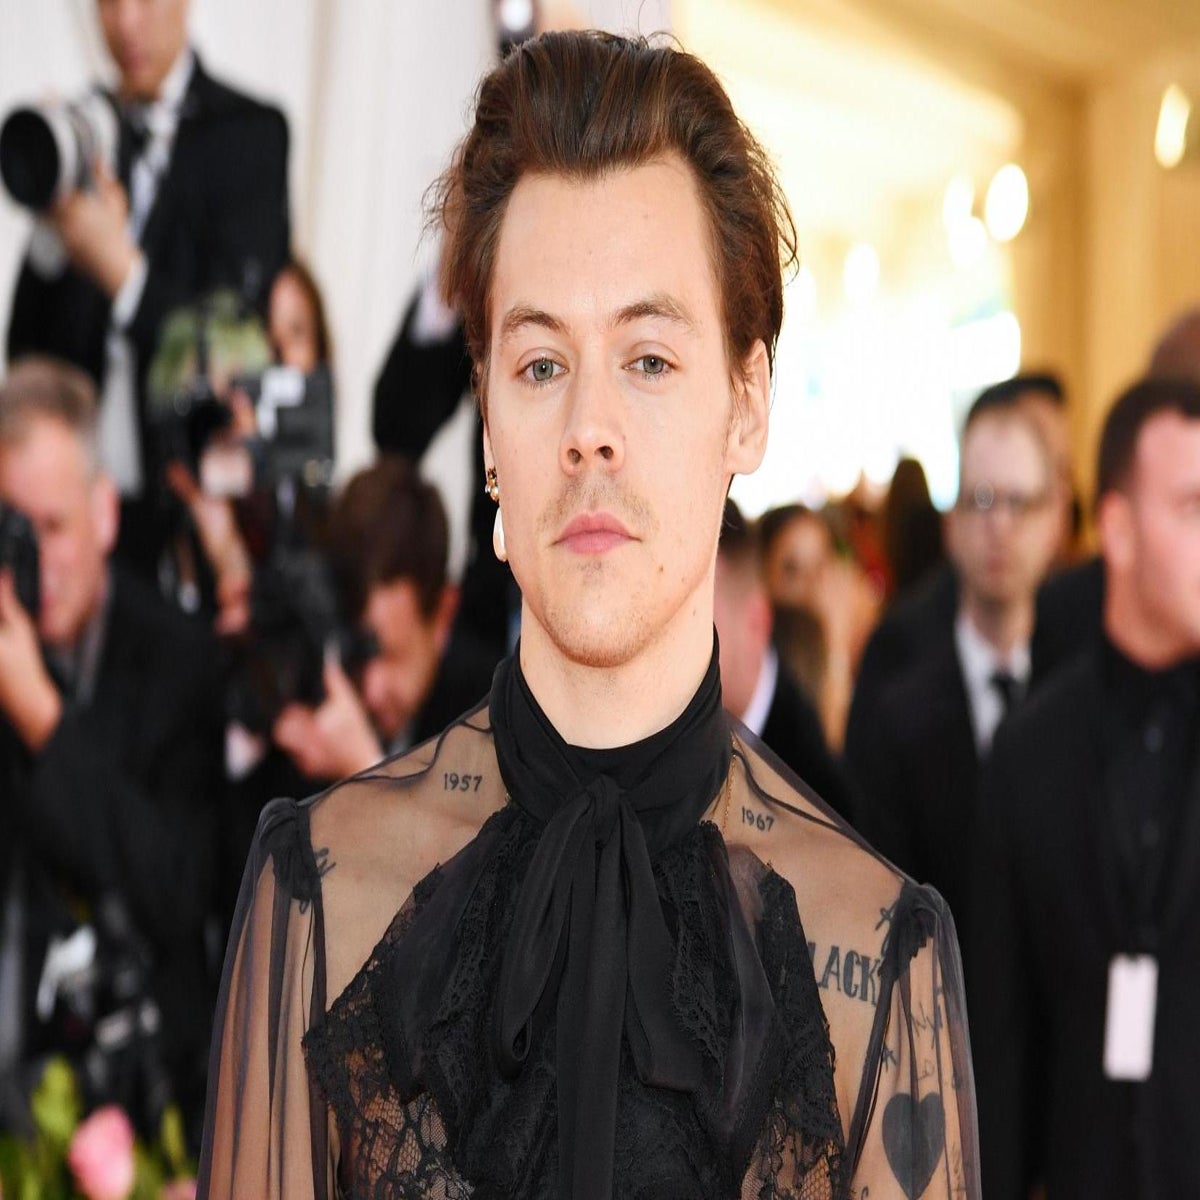 Harry Styles Wears His Fave Saint Laurent Jacket in the 'Drag Me